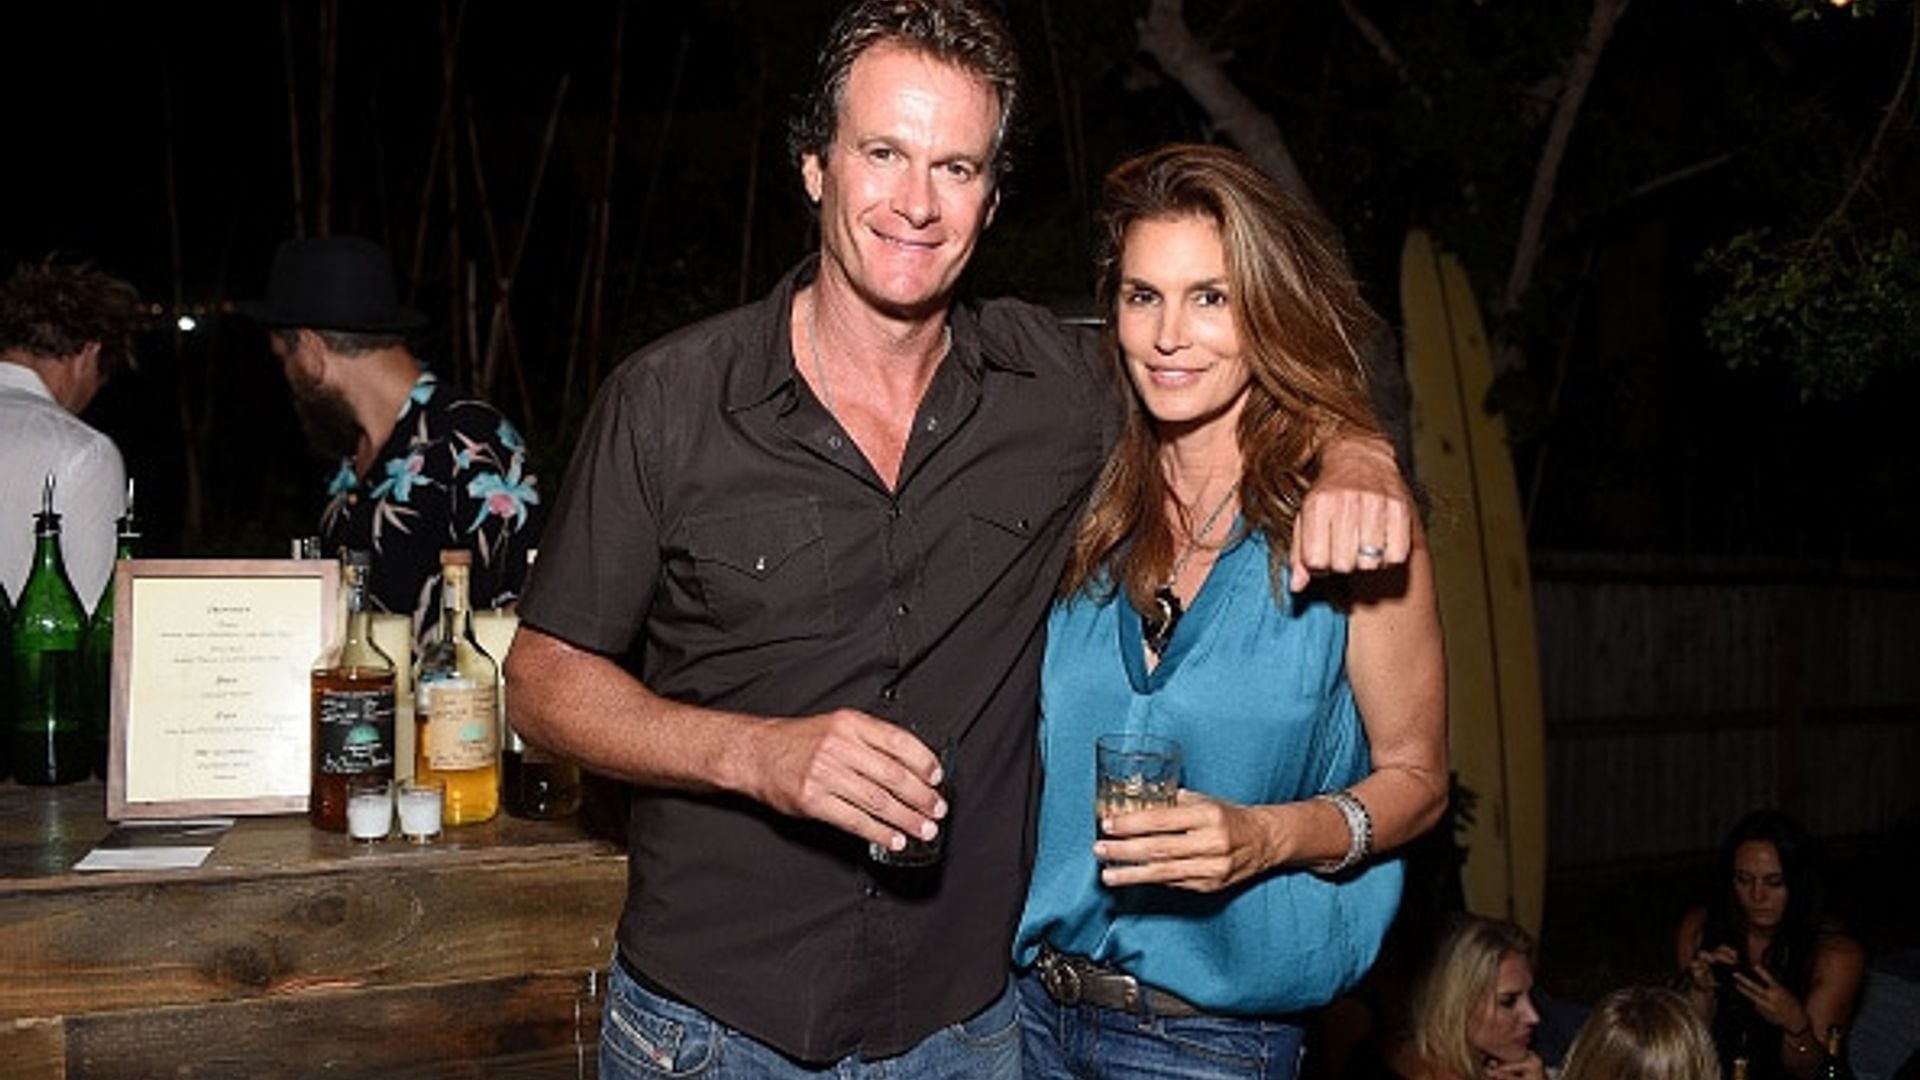 Cindy Crawford shares pictures from her romantic 50th birthday getaway with Rande Gerber